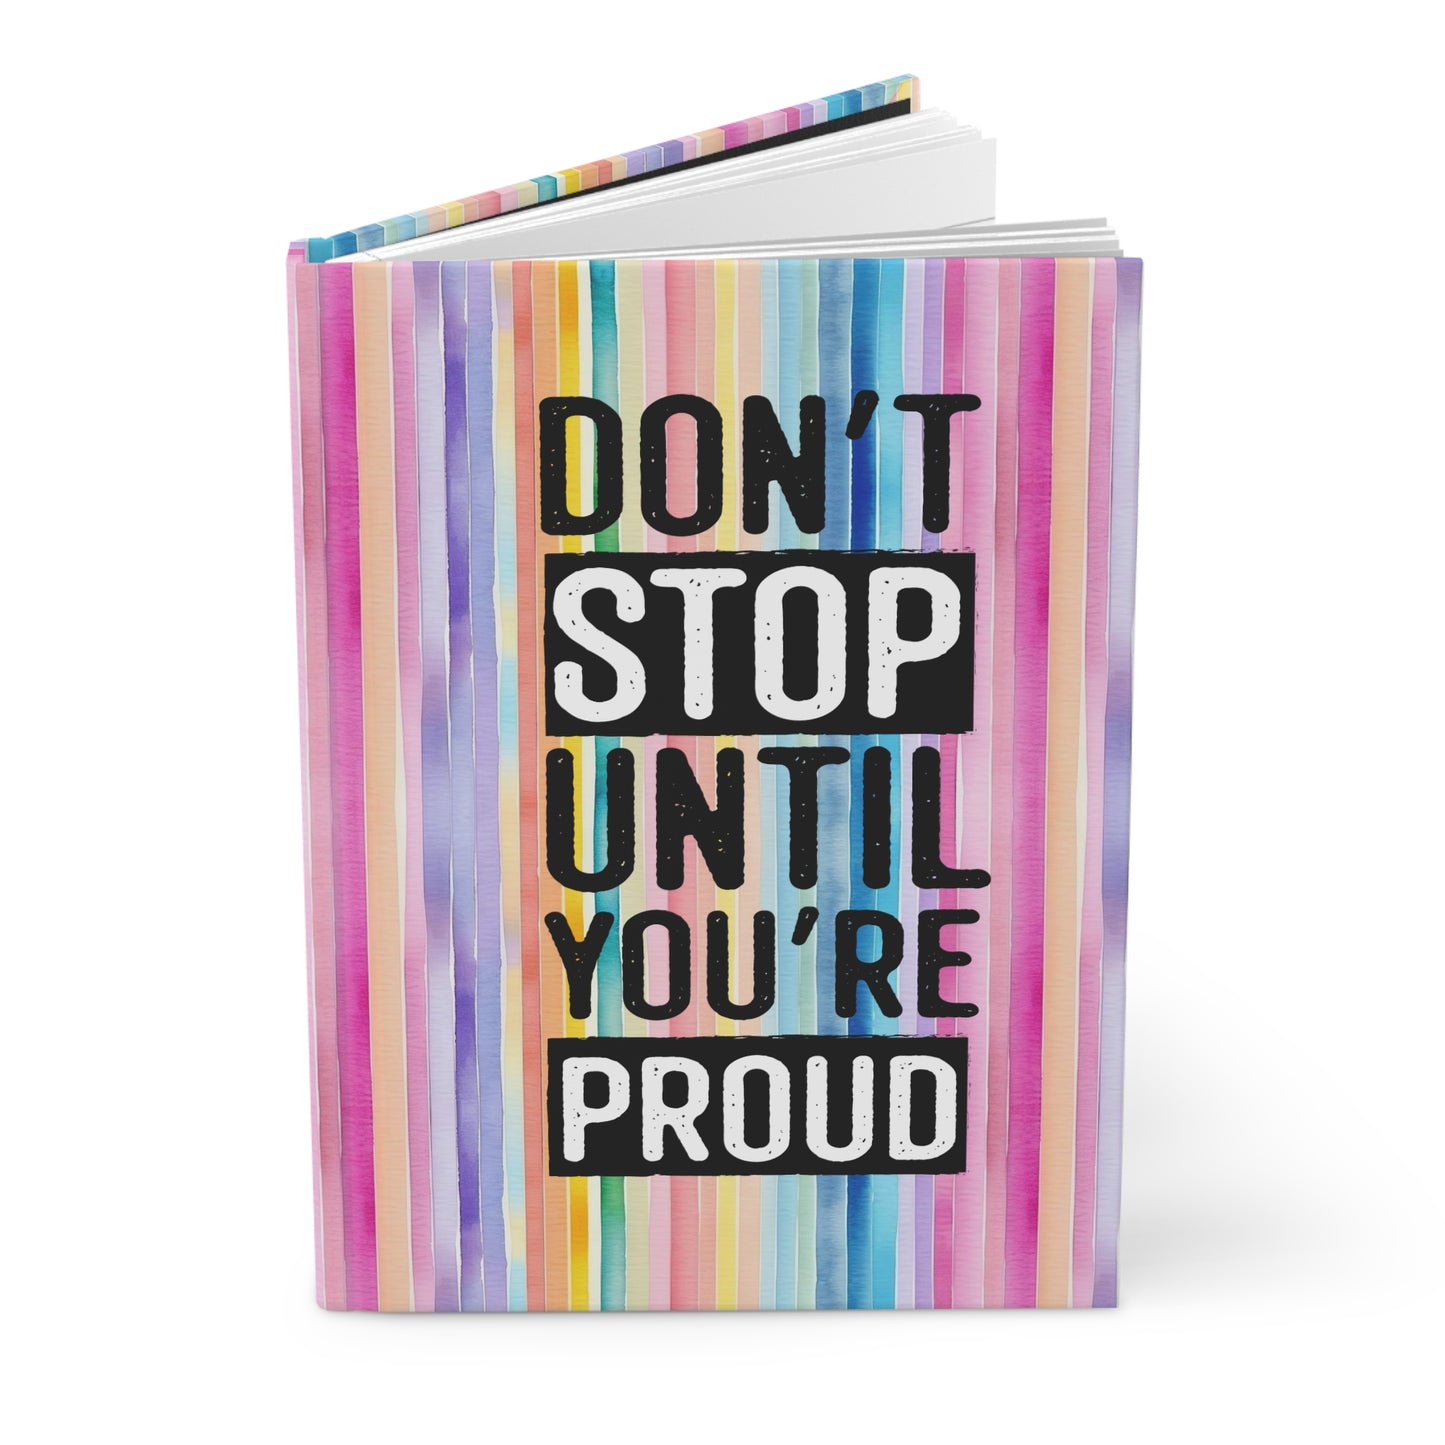 Don't Stop Until You're Proud - Self Love - Inspirational Quote  - Rainbow Watercolor Vertical - Hardcover Journal Matte